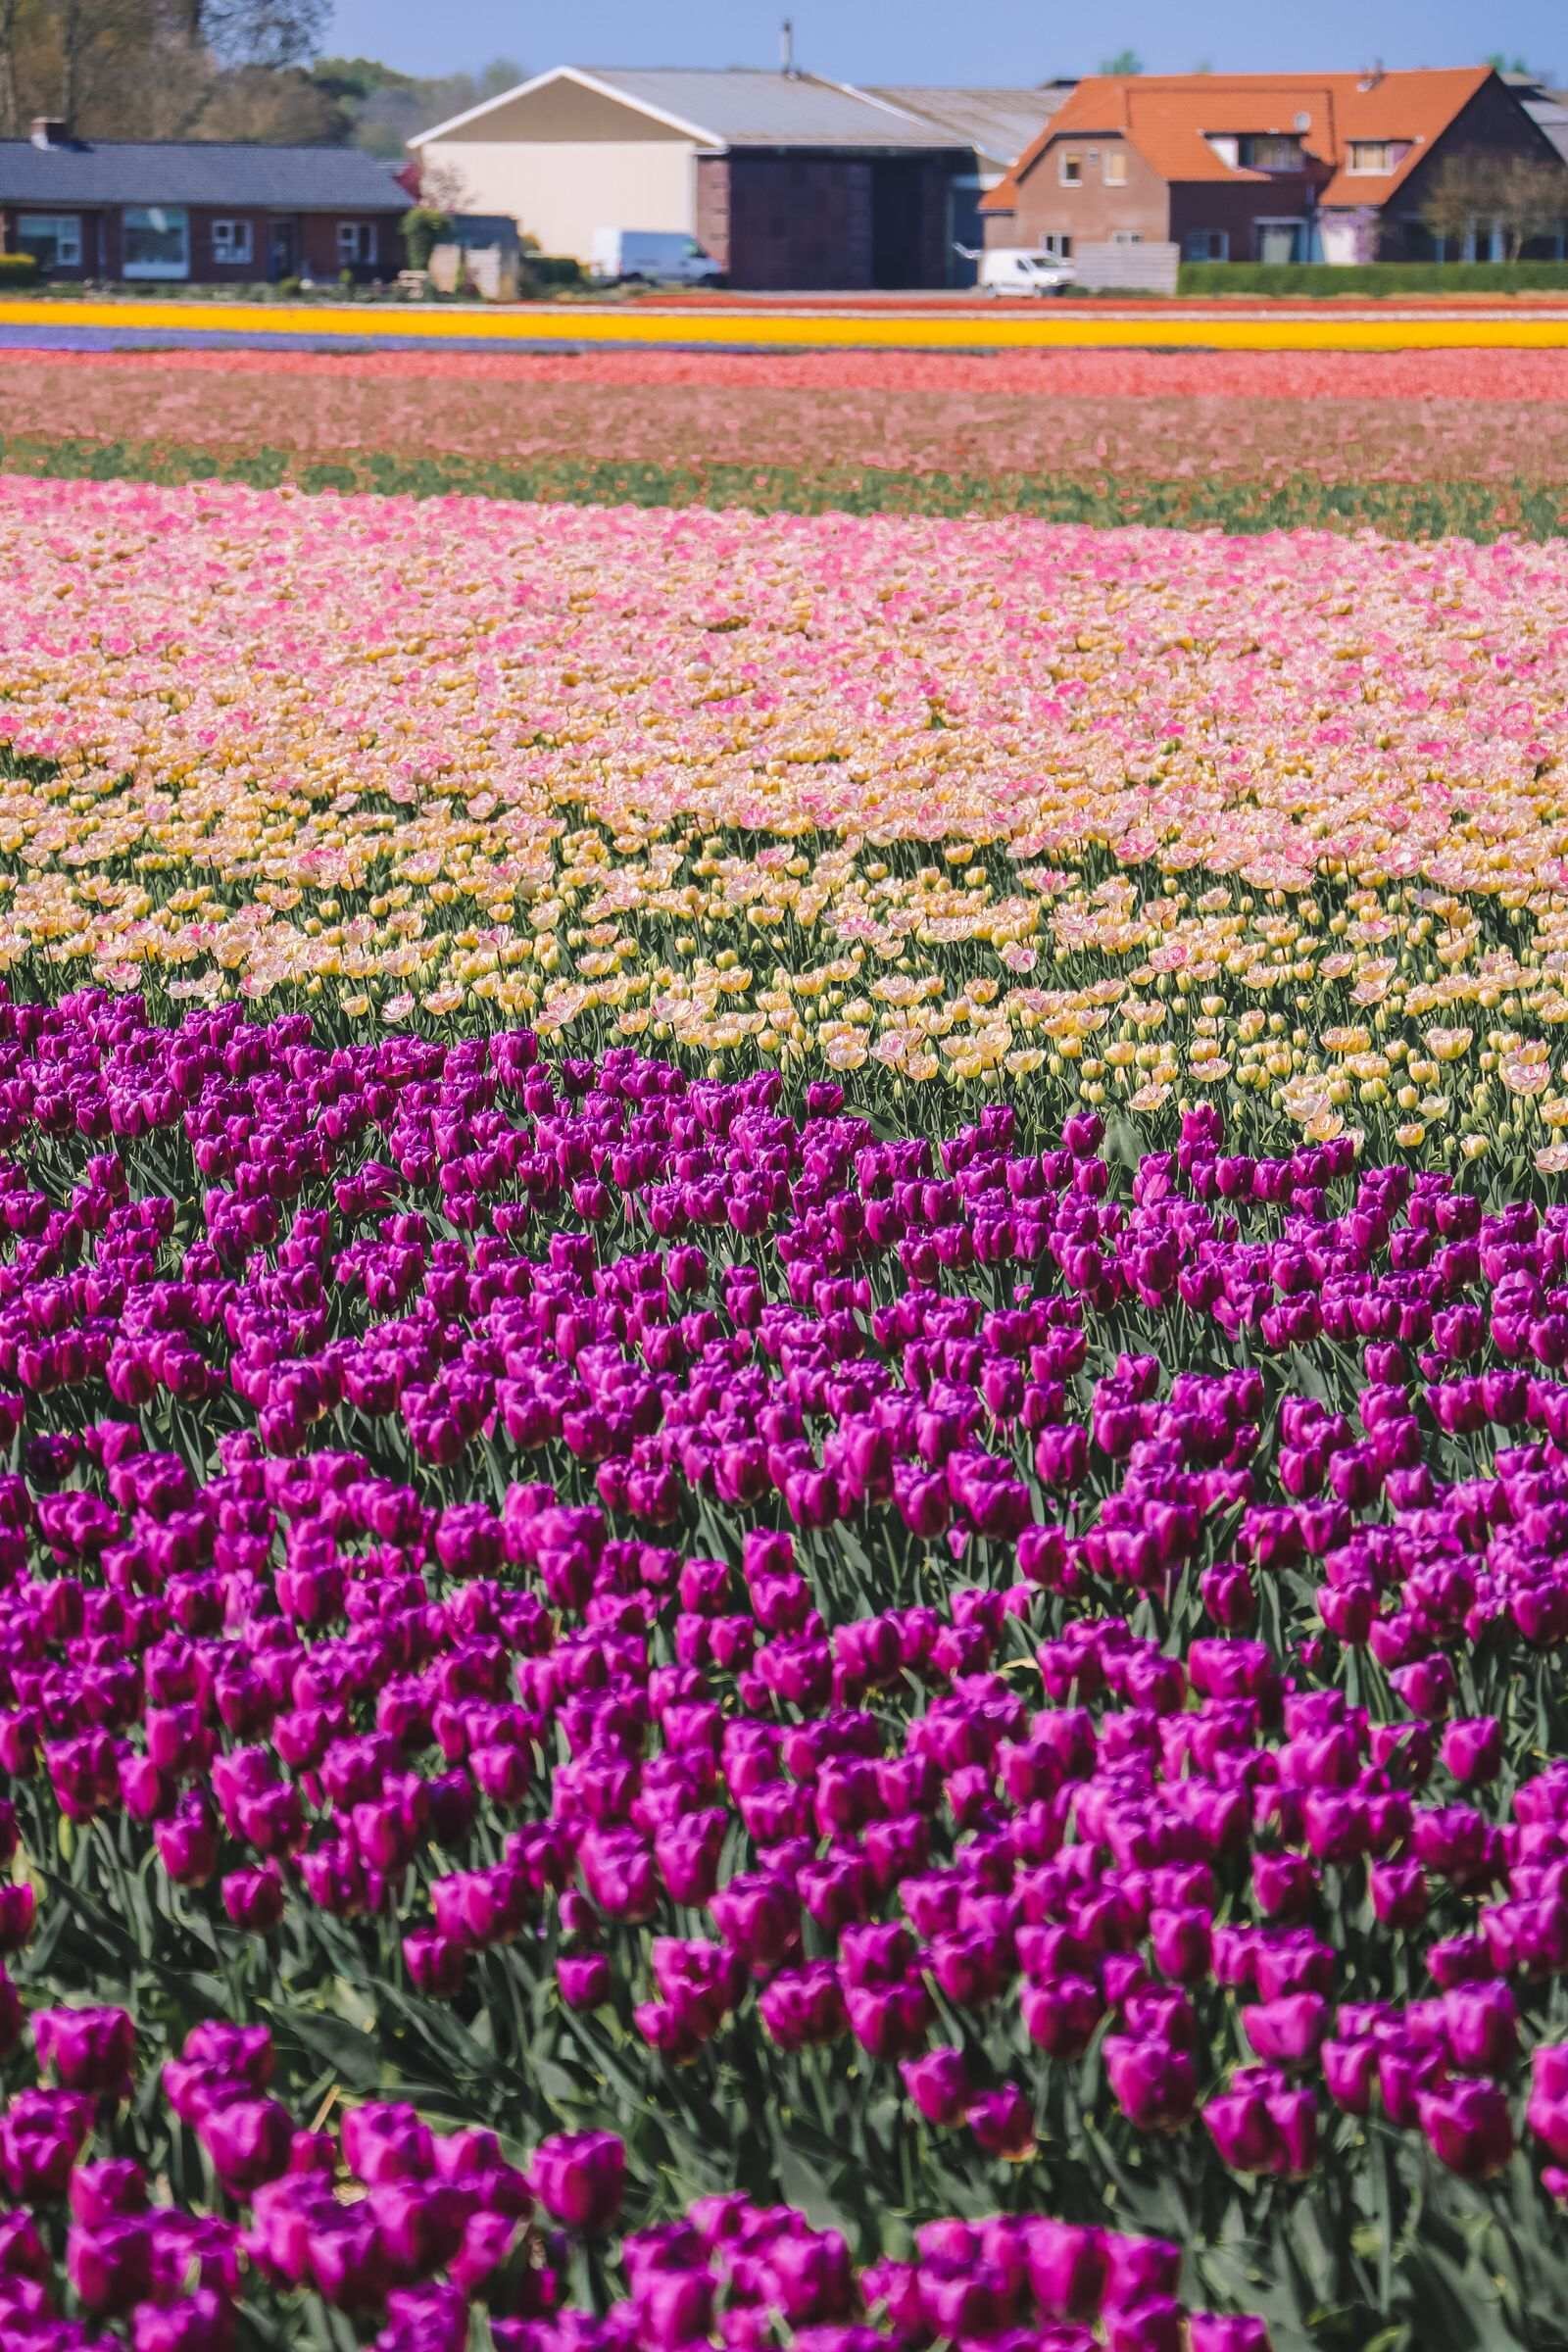 A Guide to seeing the tulips in Lisse on a budget - 